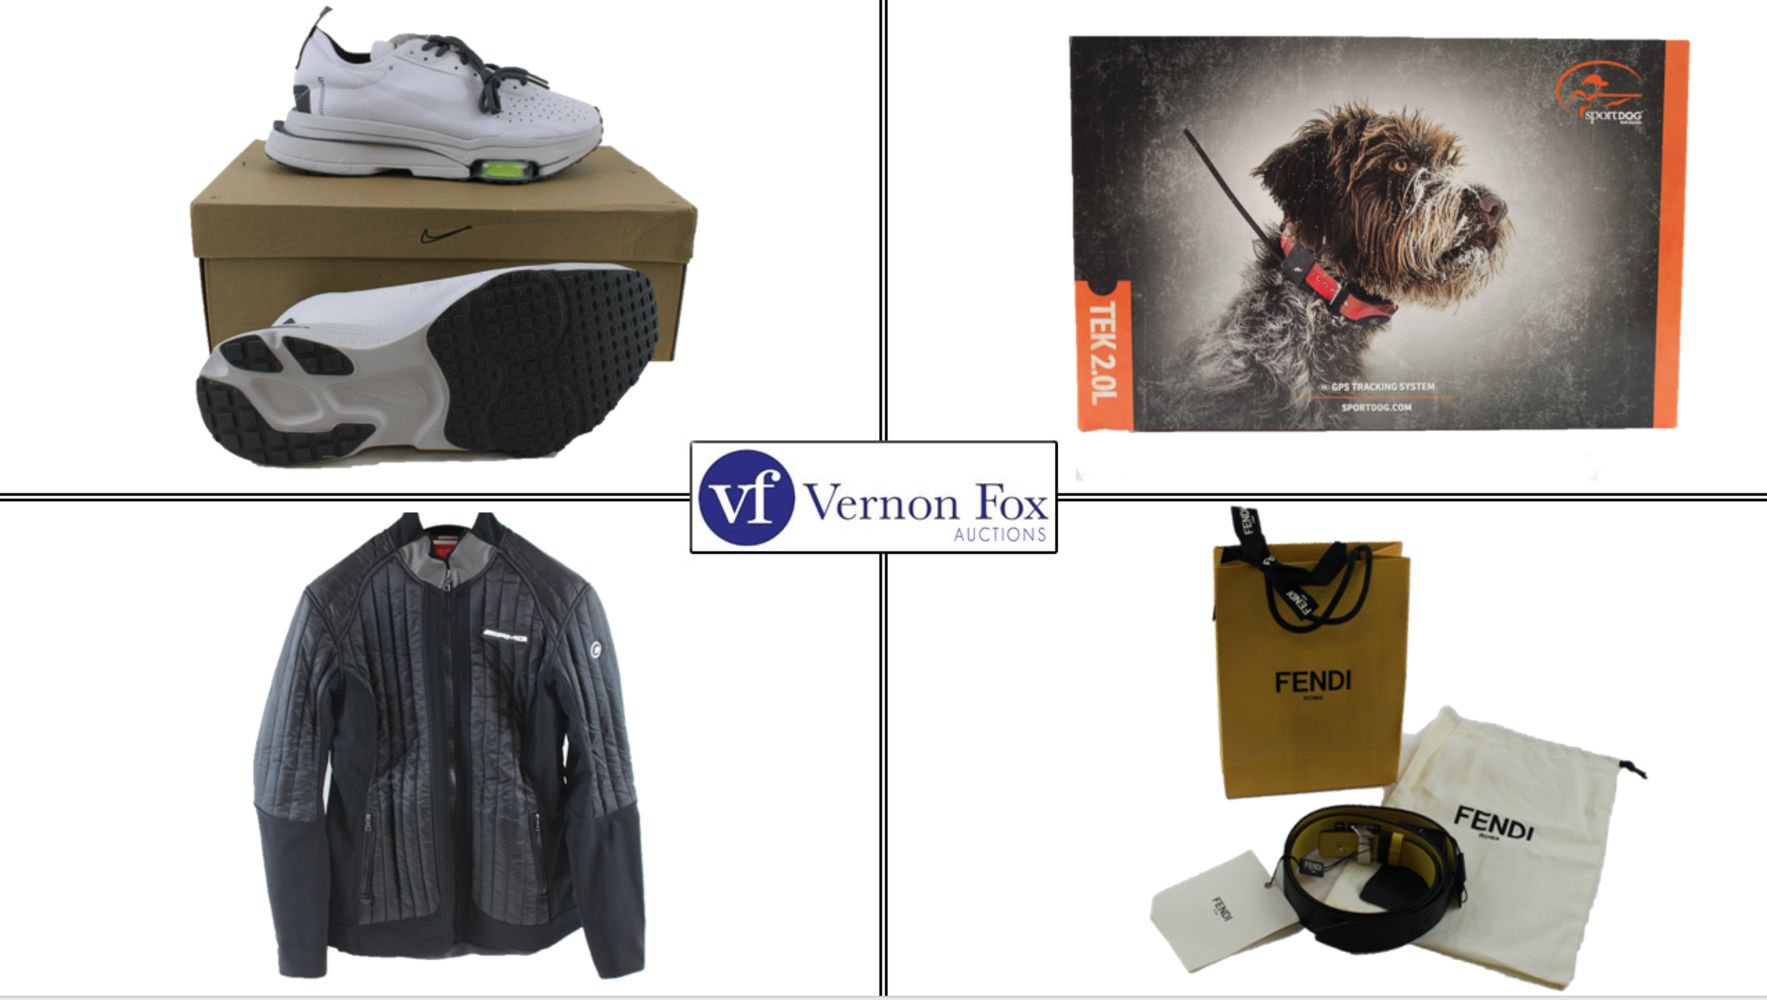 TIMED ONLINE AUCTION: A superb range of Trainers, Sportswear and Fashion items, plus much more. FREE UK DELIVERY!